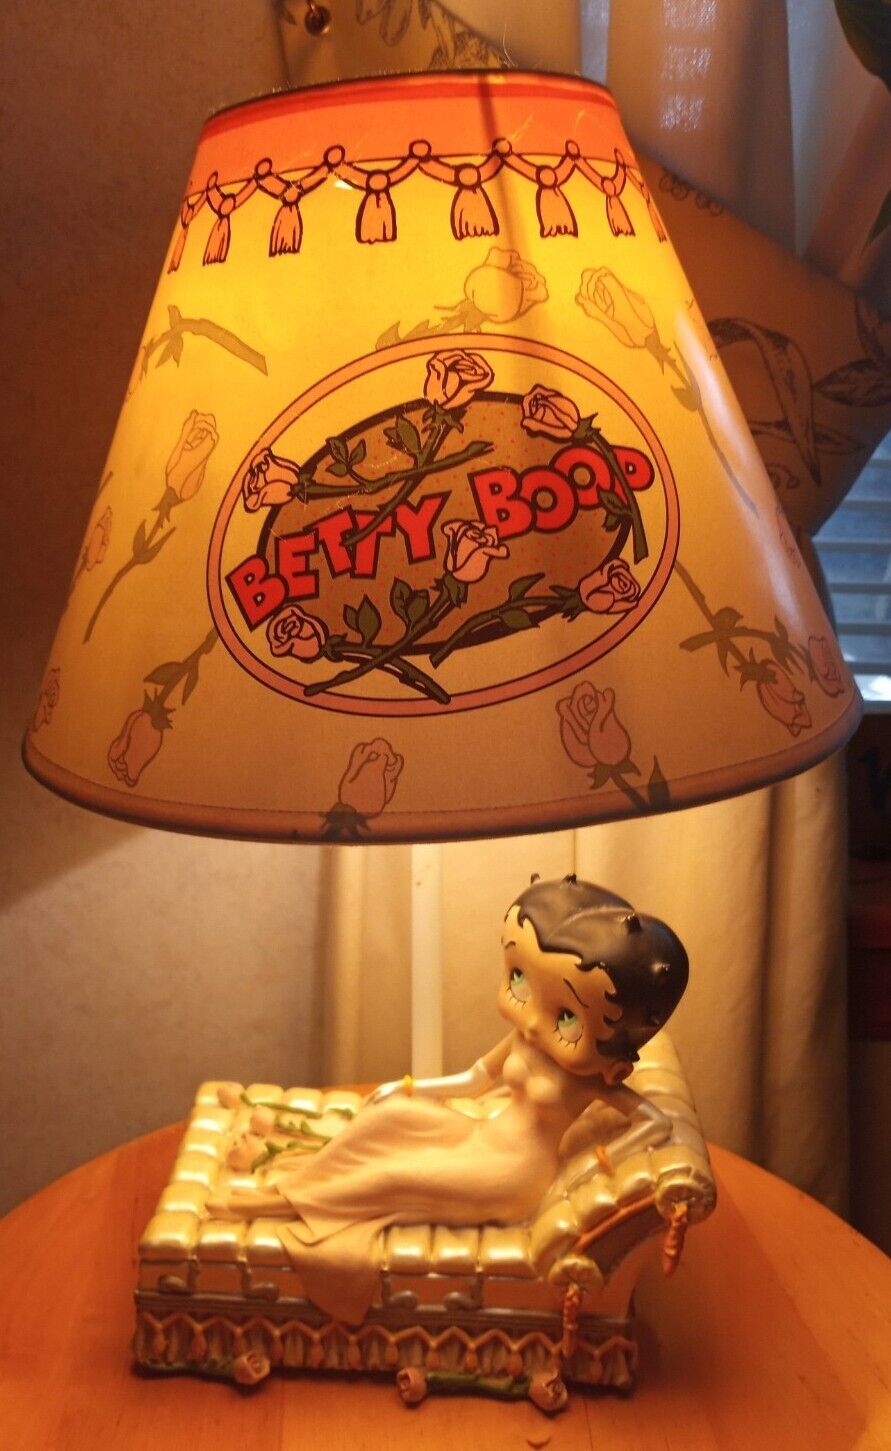 1999 Betty Boop Bed of Roses Vandor Table Accent Lamp Figural Novelty Resin